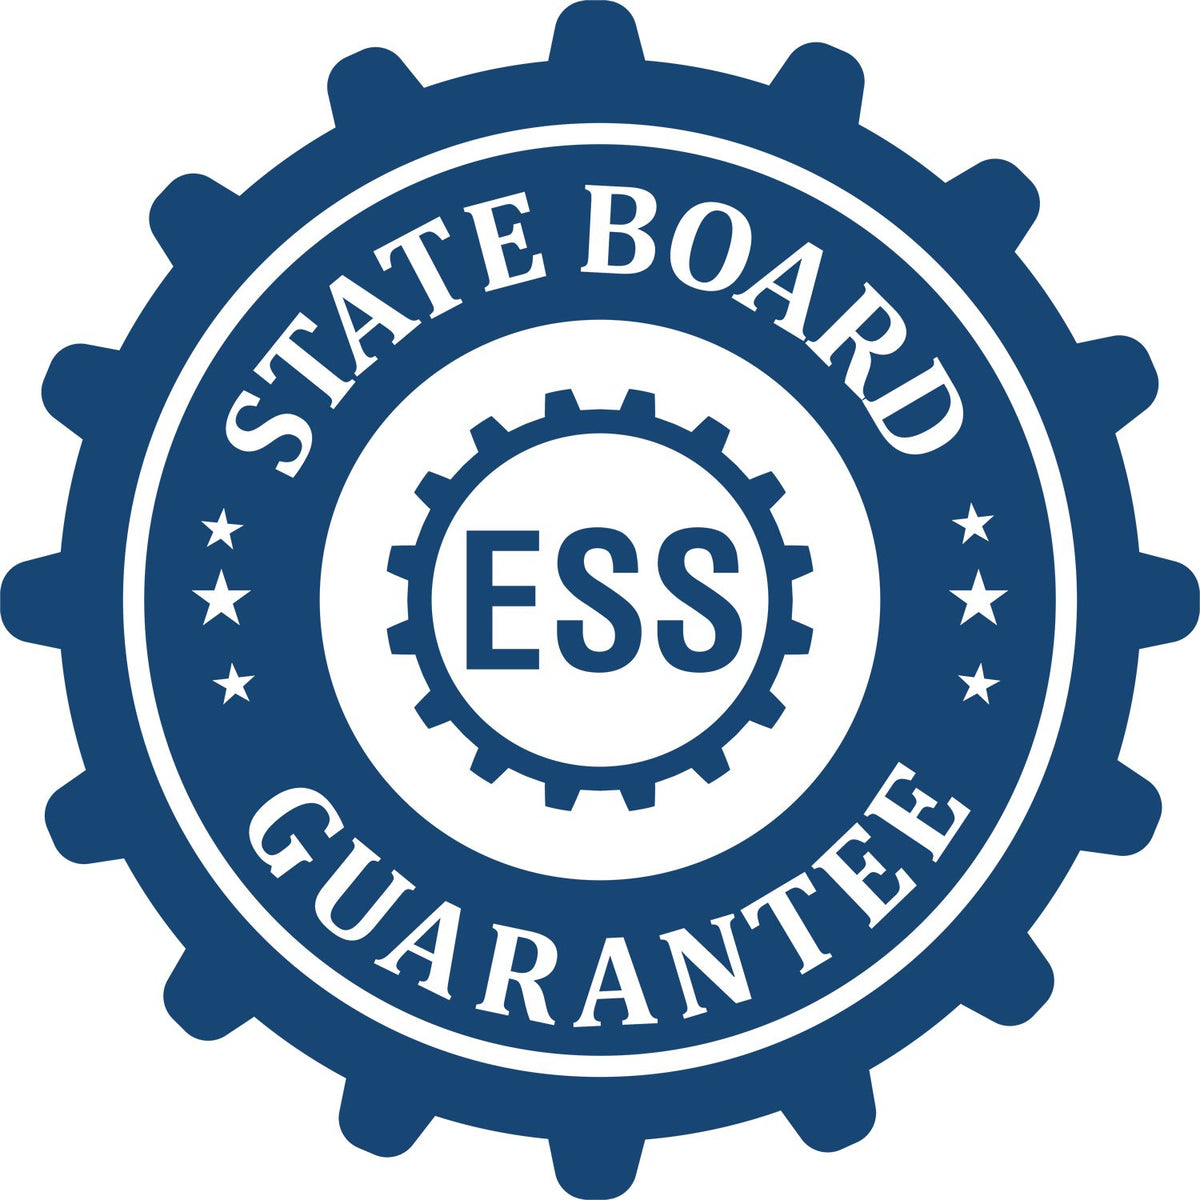 An emblem in a gear shape illustrating a state board guarantee for the Montana Geologist Desk Seal